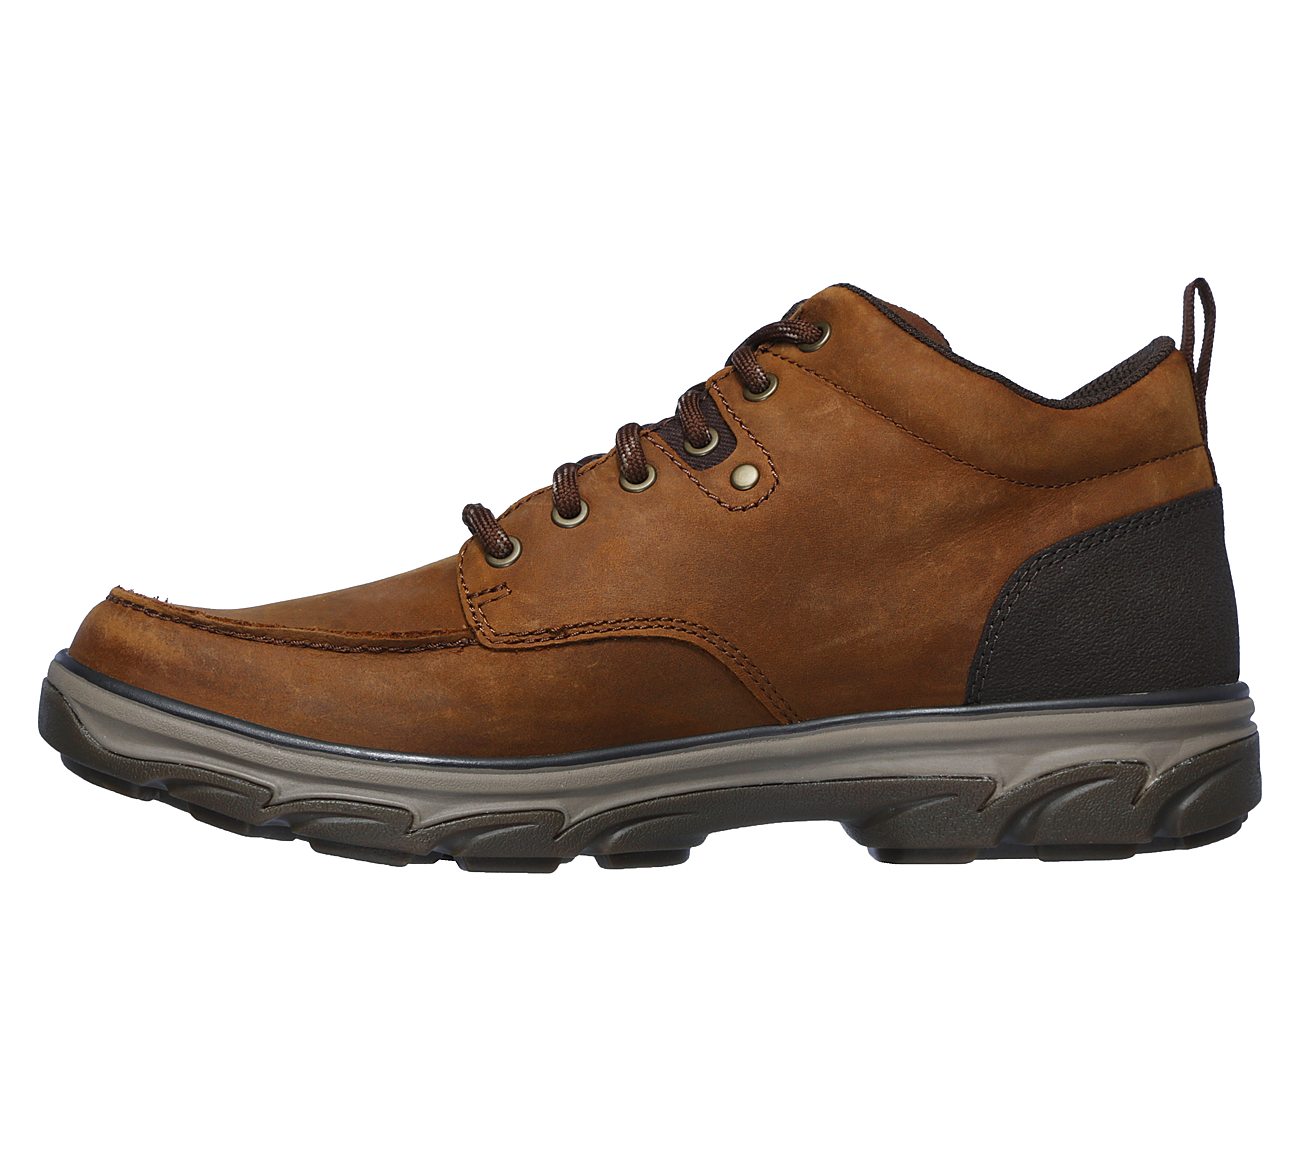 SKECHERS Relaxed Fit: Resment - Waler 